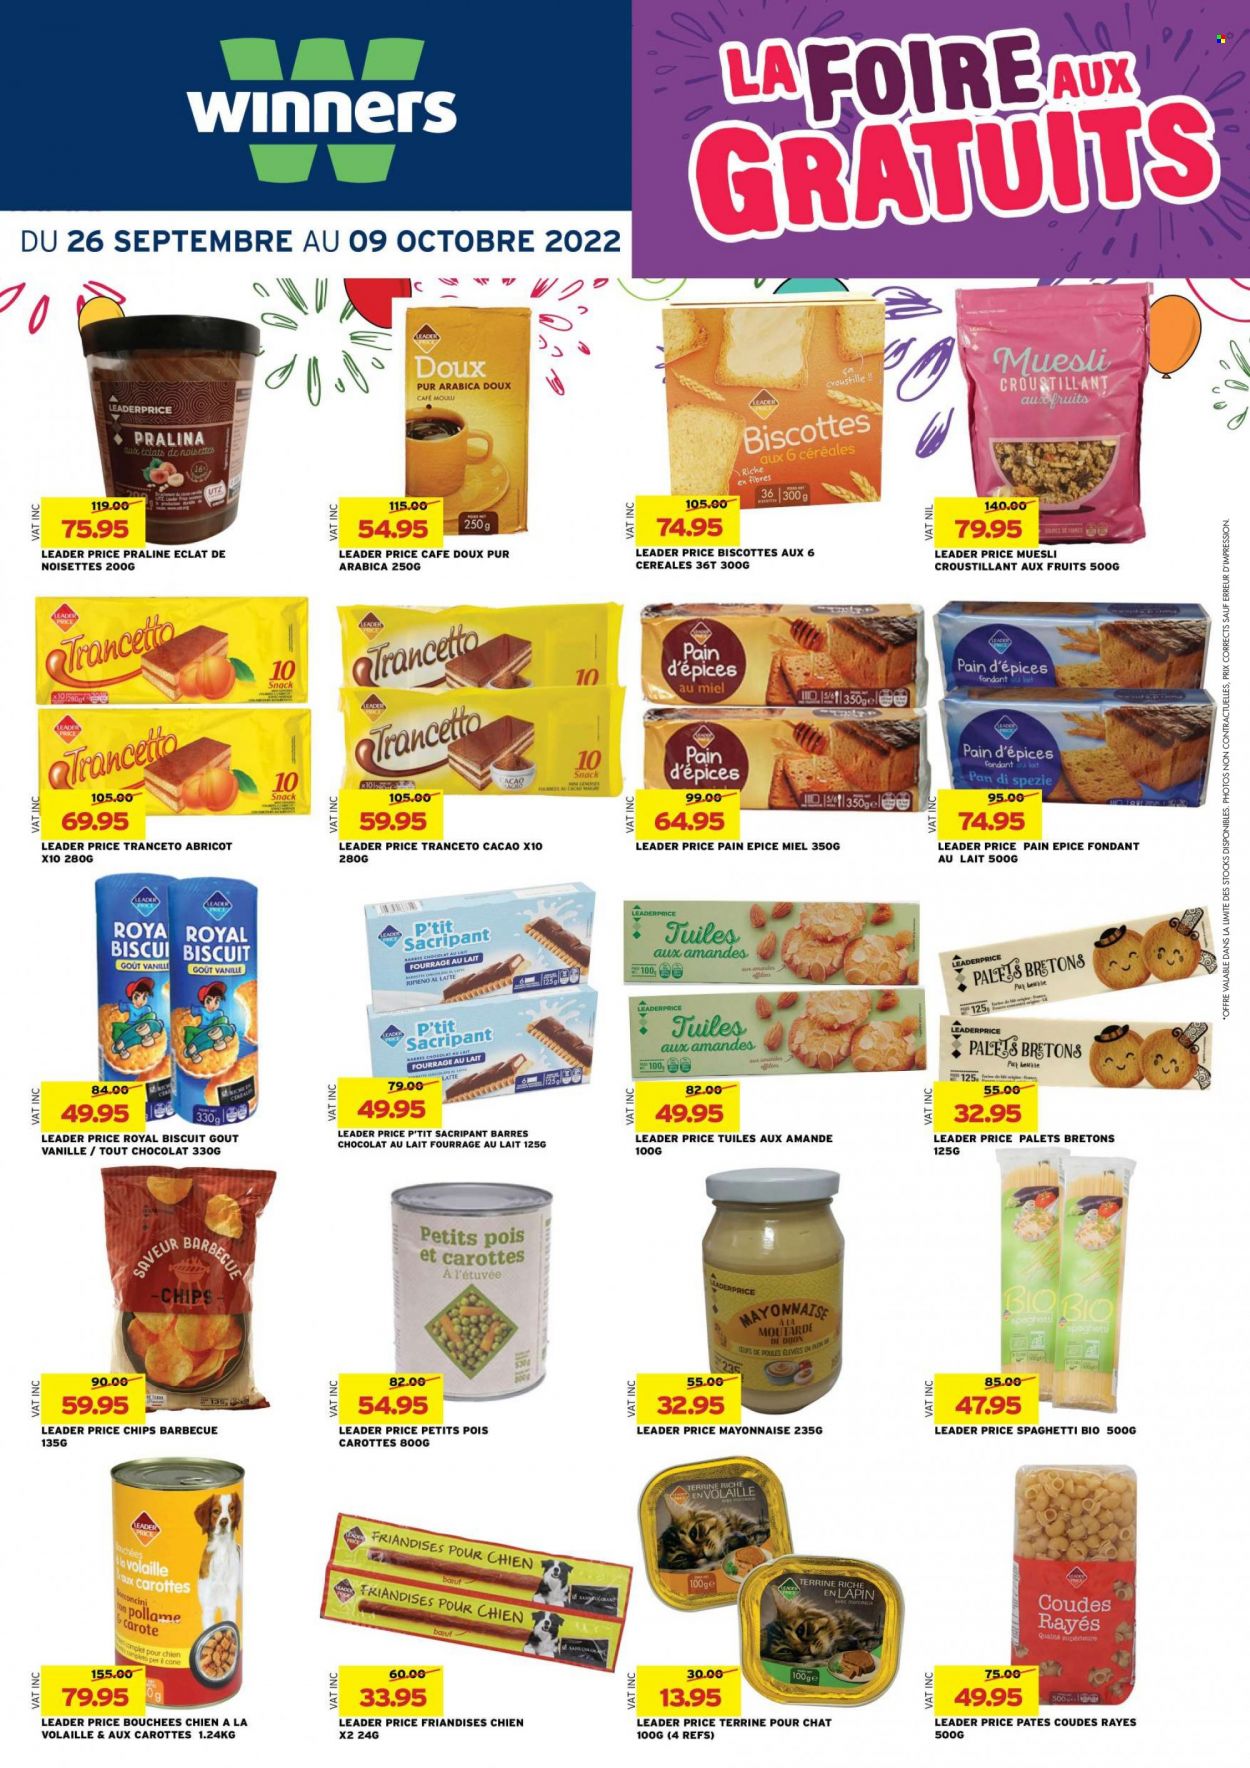 thumbnail - Winner's Catalogue - 26.09.2022 - 9.10.2022 - Sales products - spaghetti, bocconcini, mayonnaise, snack, biscuit, chips, muesli, Eclat, pan. Page 10.